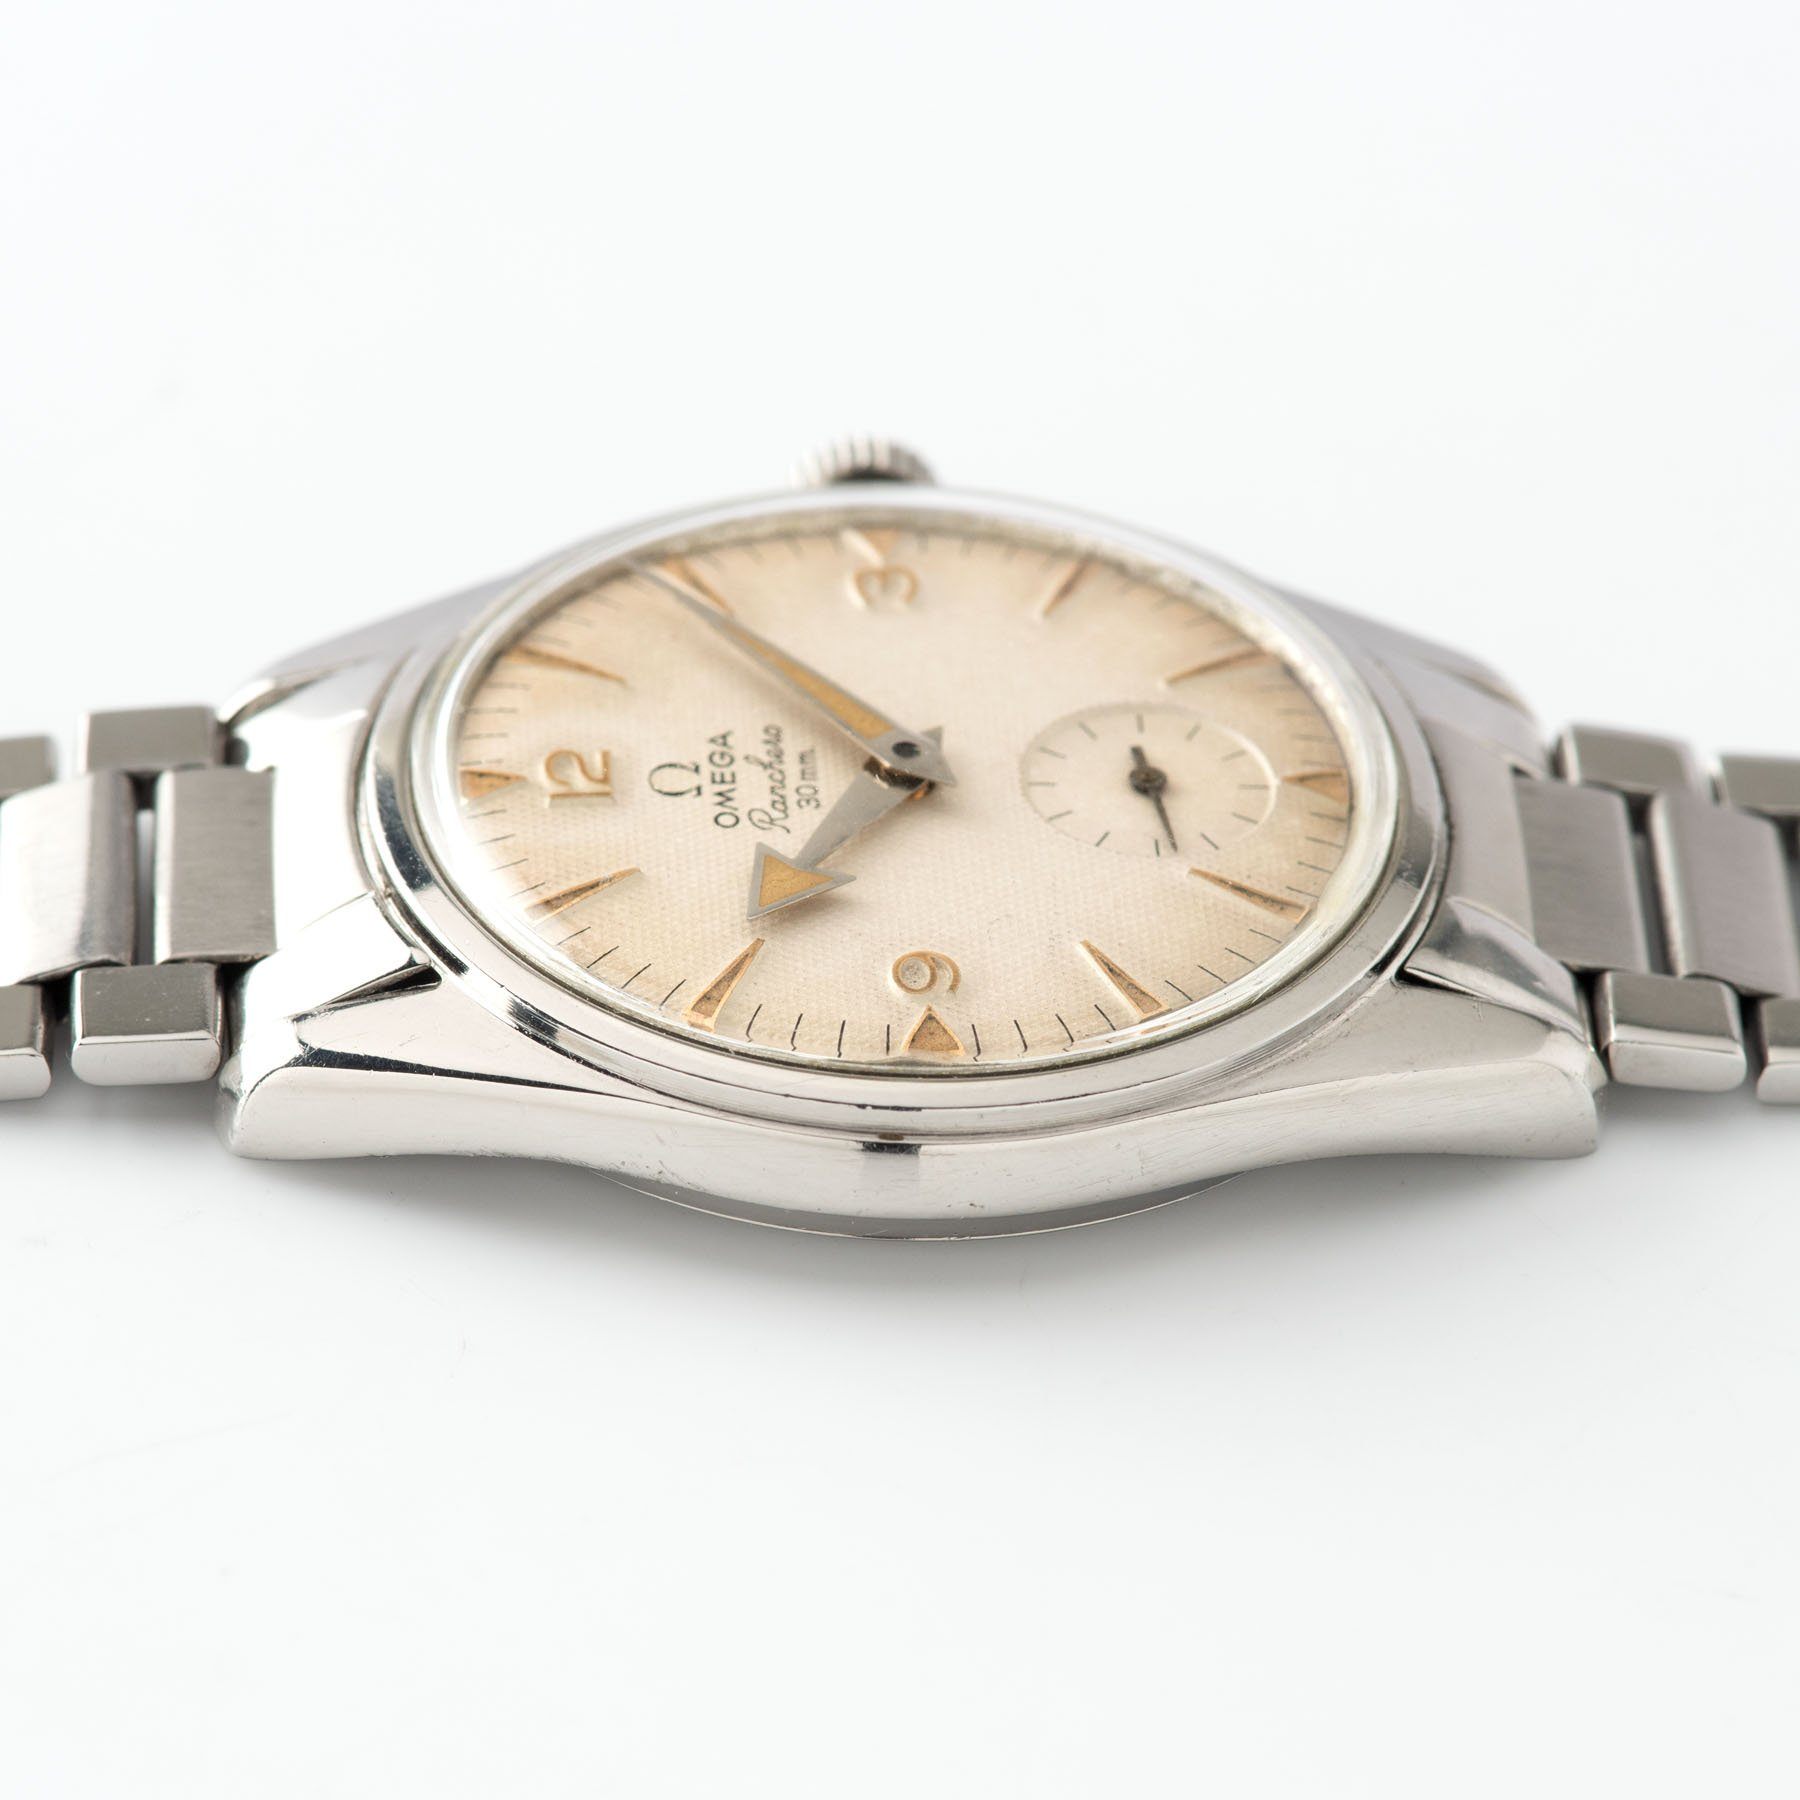 Omega Ranchero White Waffle Dial 2990 with Archive Extract